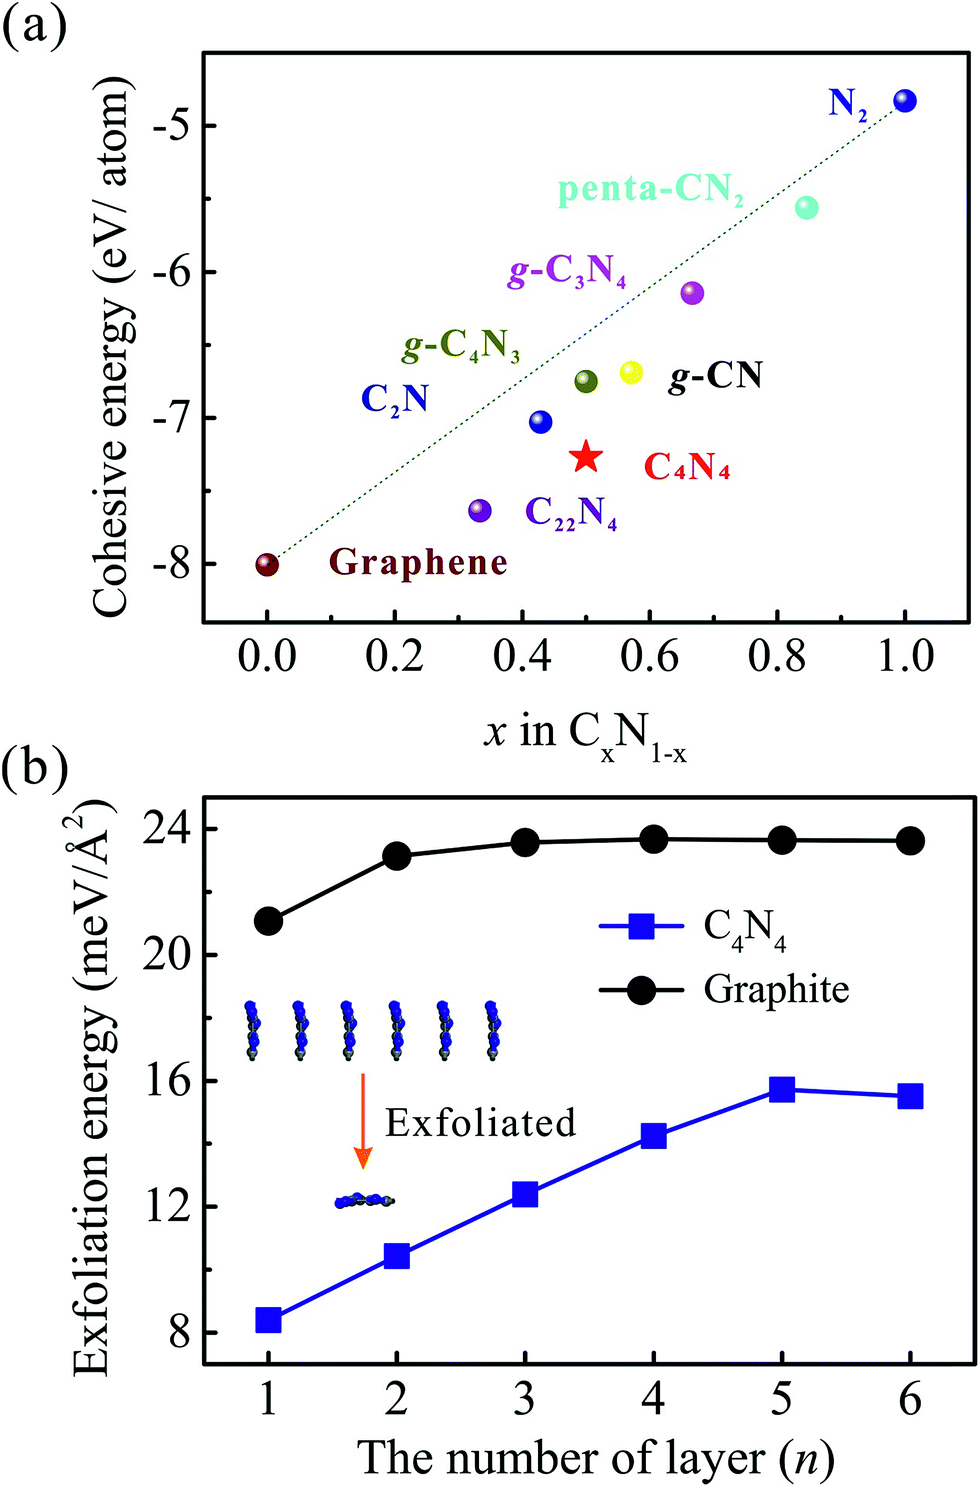 A Novel Porous C4n4 Monolayer As A Potential Anchoring Material For Lithium Sulfur Battery Design Journal Of Materials Chemistry A Rsc Publishing